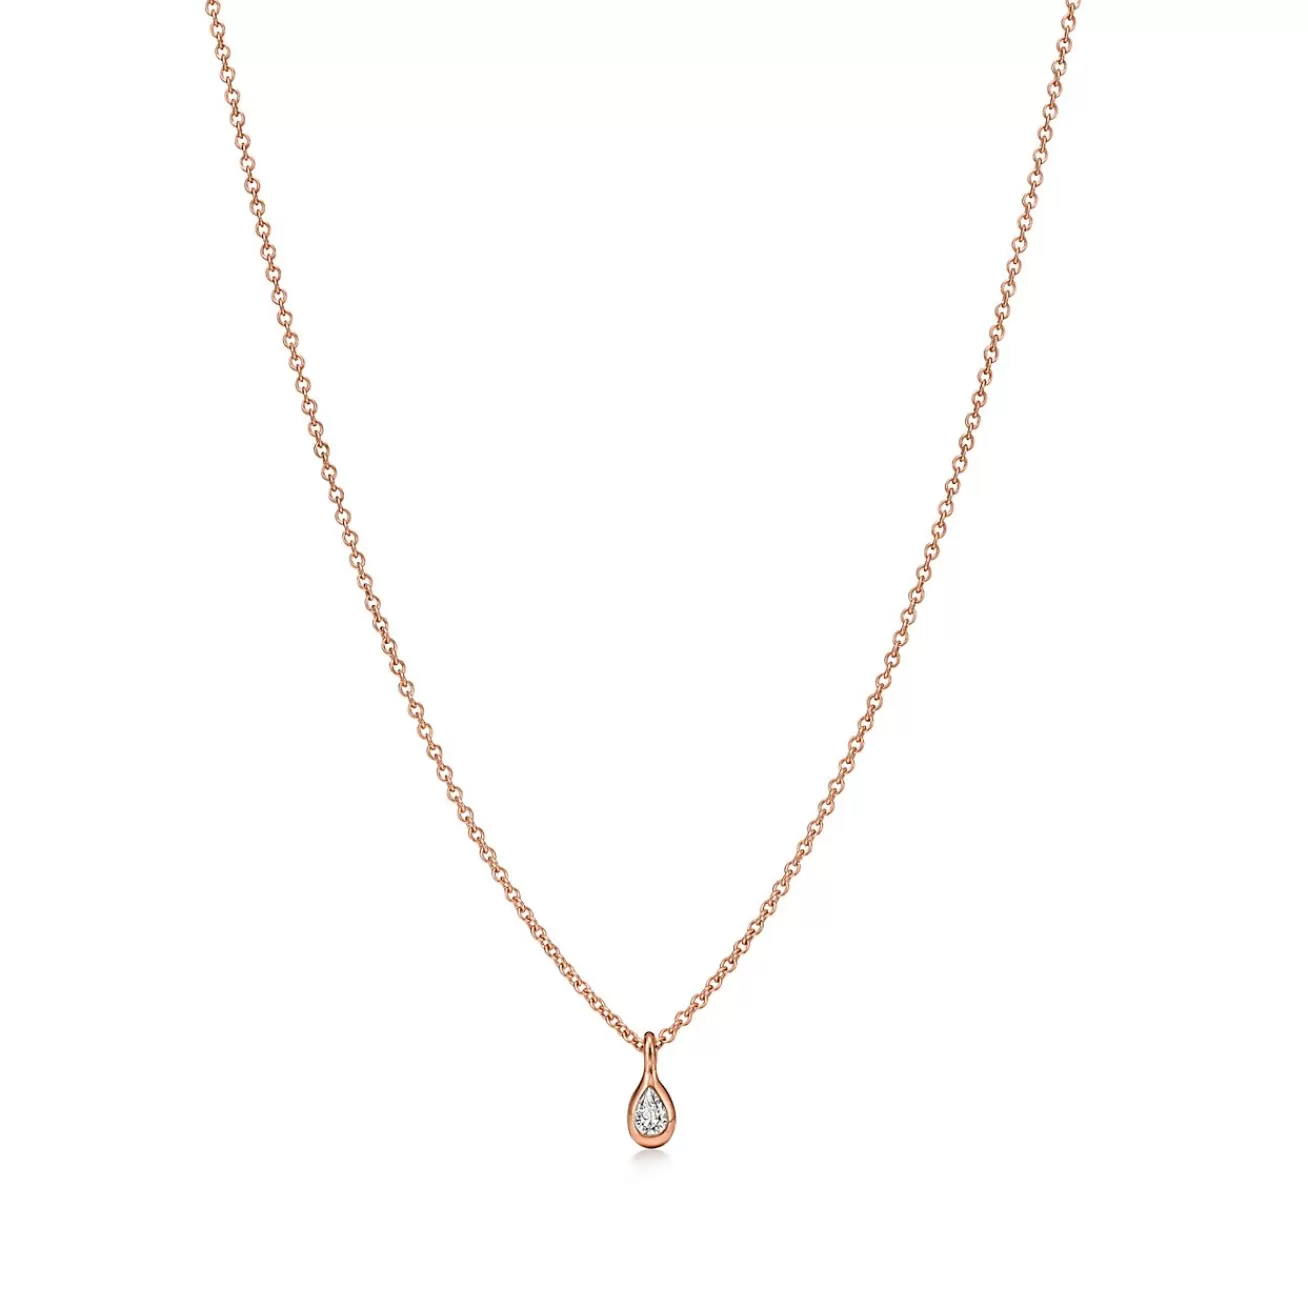 Tiffany & Co. Elsa Peretti® Diamonds by the Yard® pendant in 18k rose gold with a pear-shaped diamond. | ^ Necklaces & Pendants | Rose Gold Jewelry